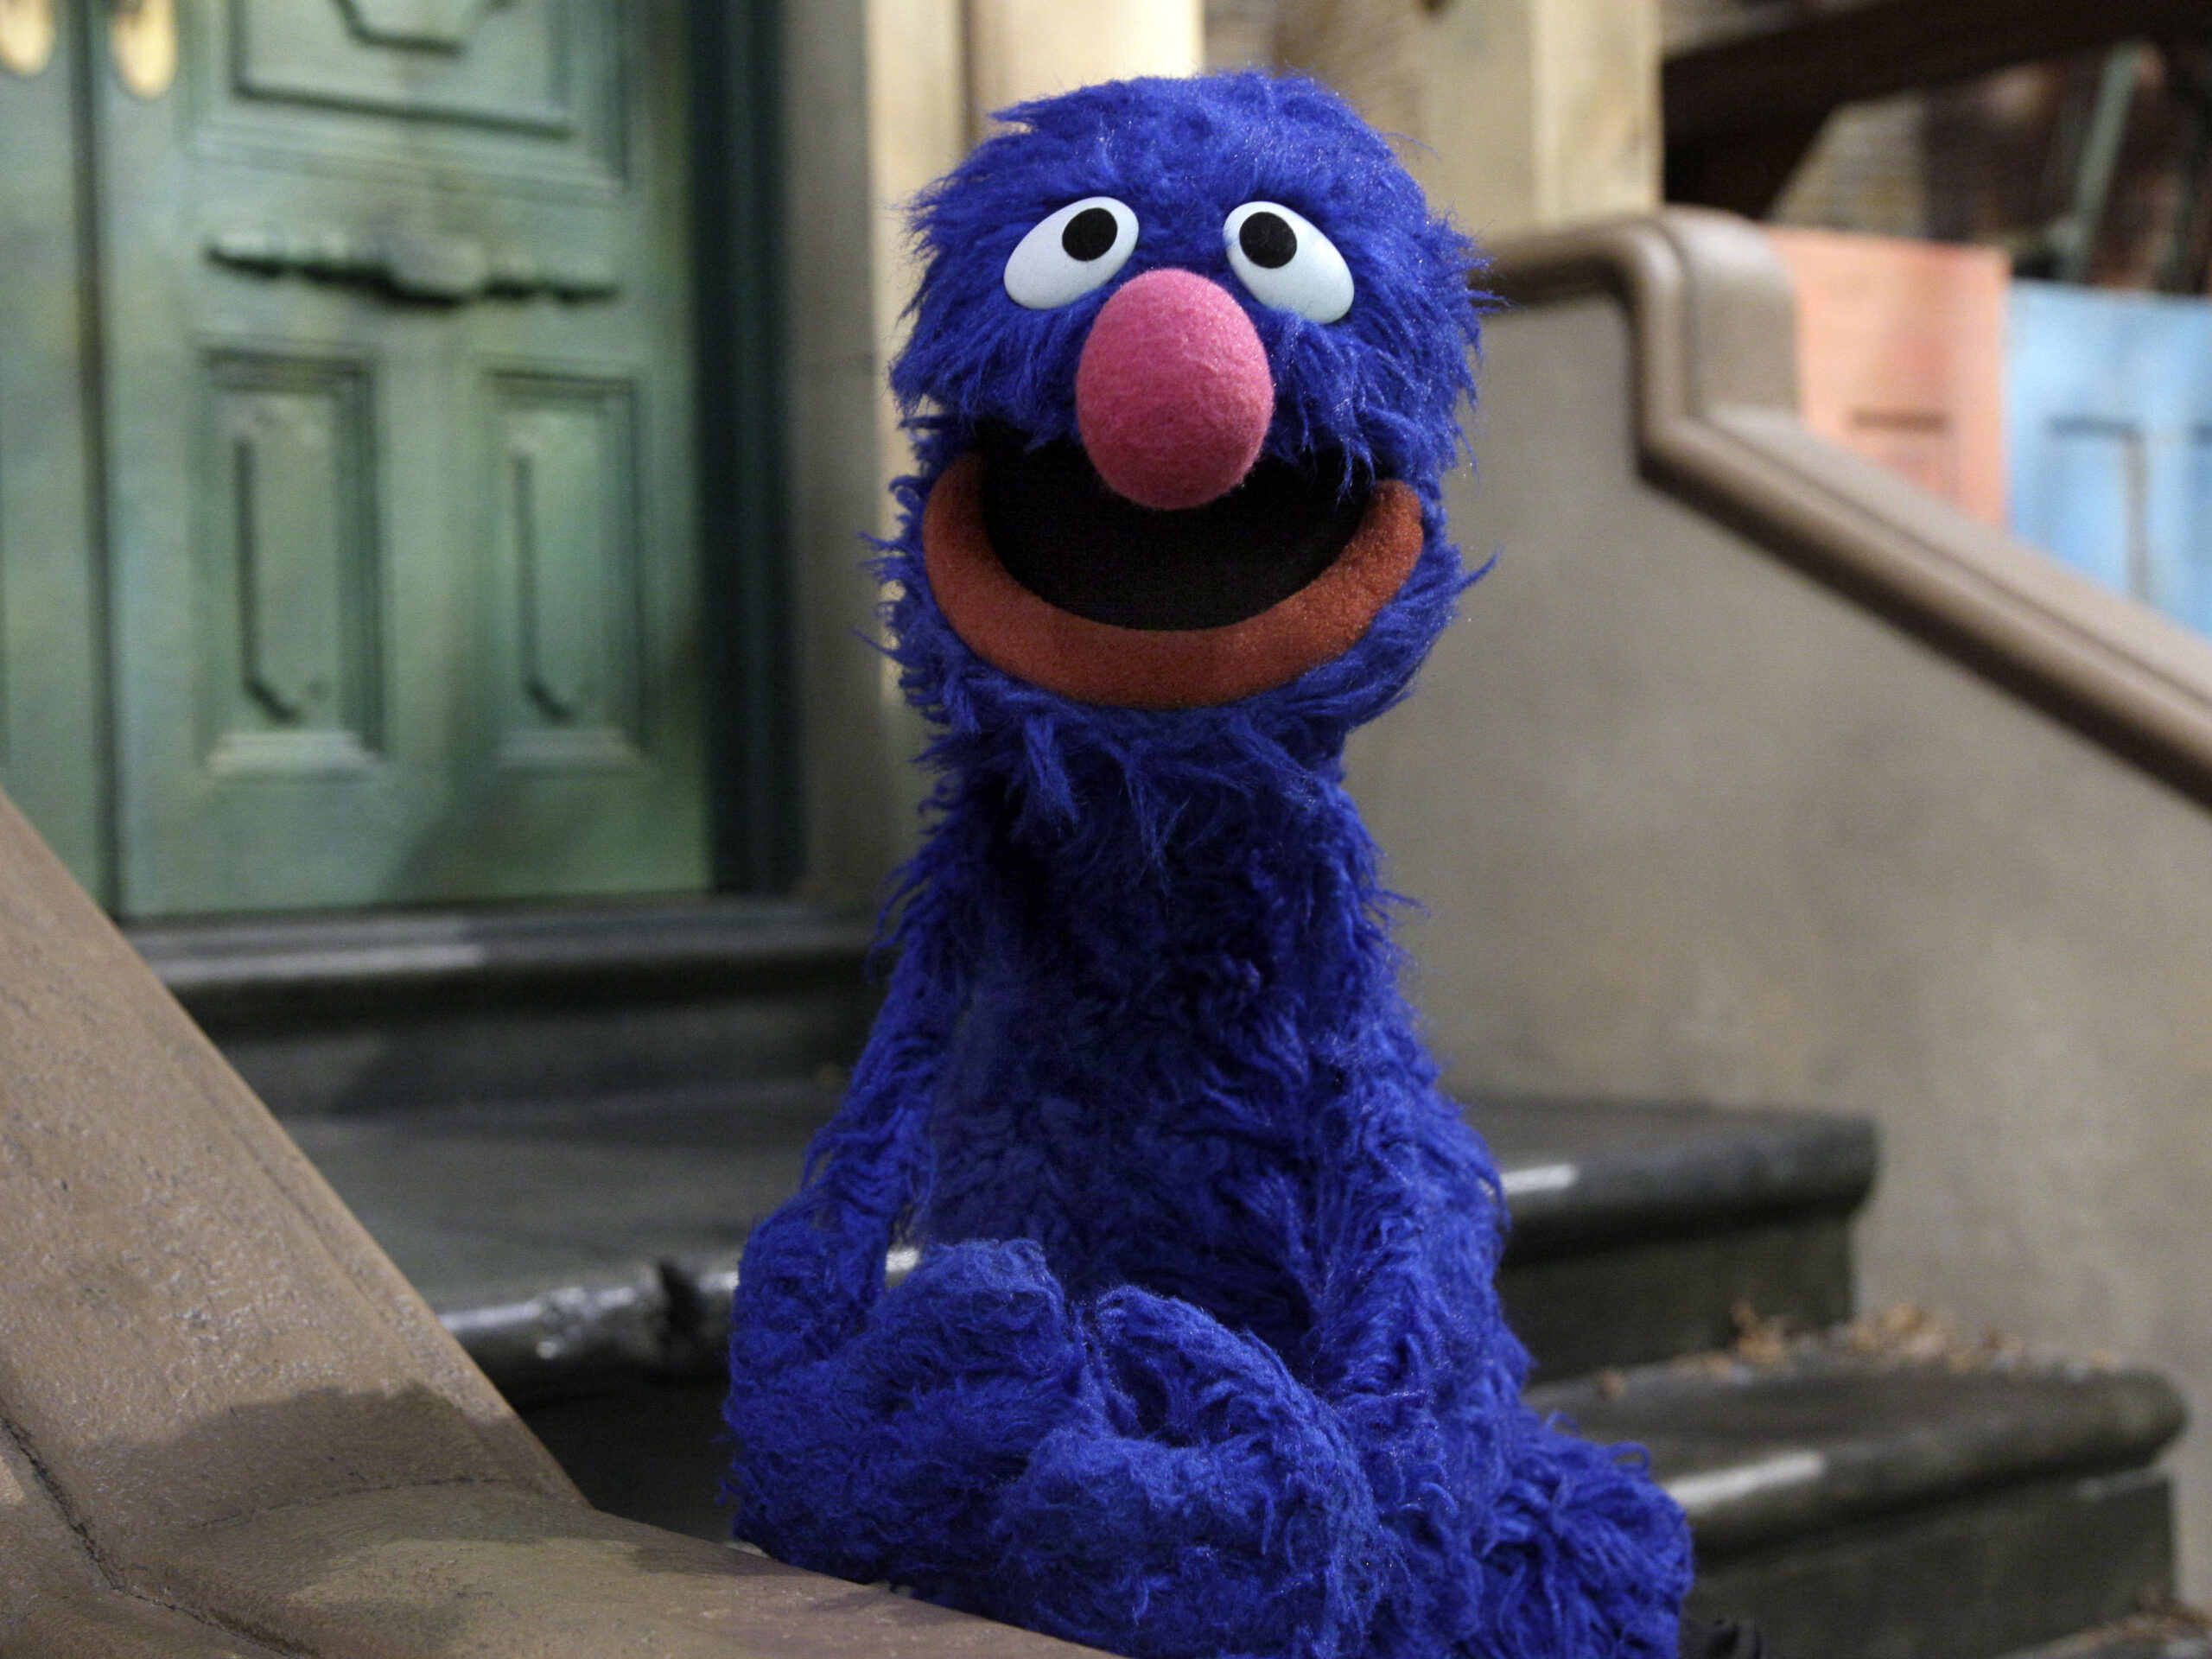 Grover the Muppet says he’s a reporter. Not for long, joke his beleaguered peers